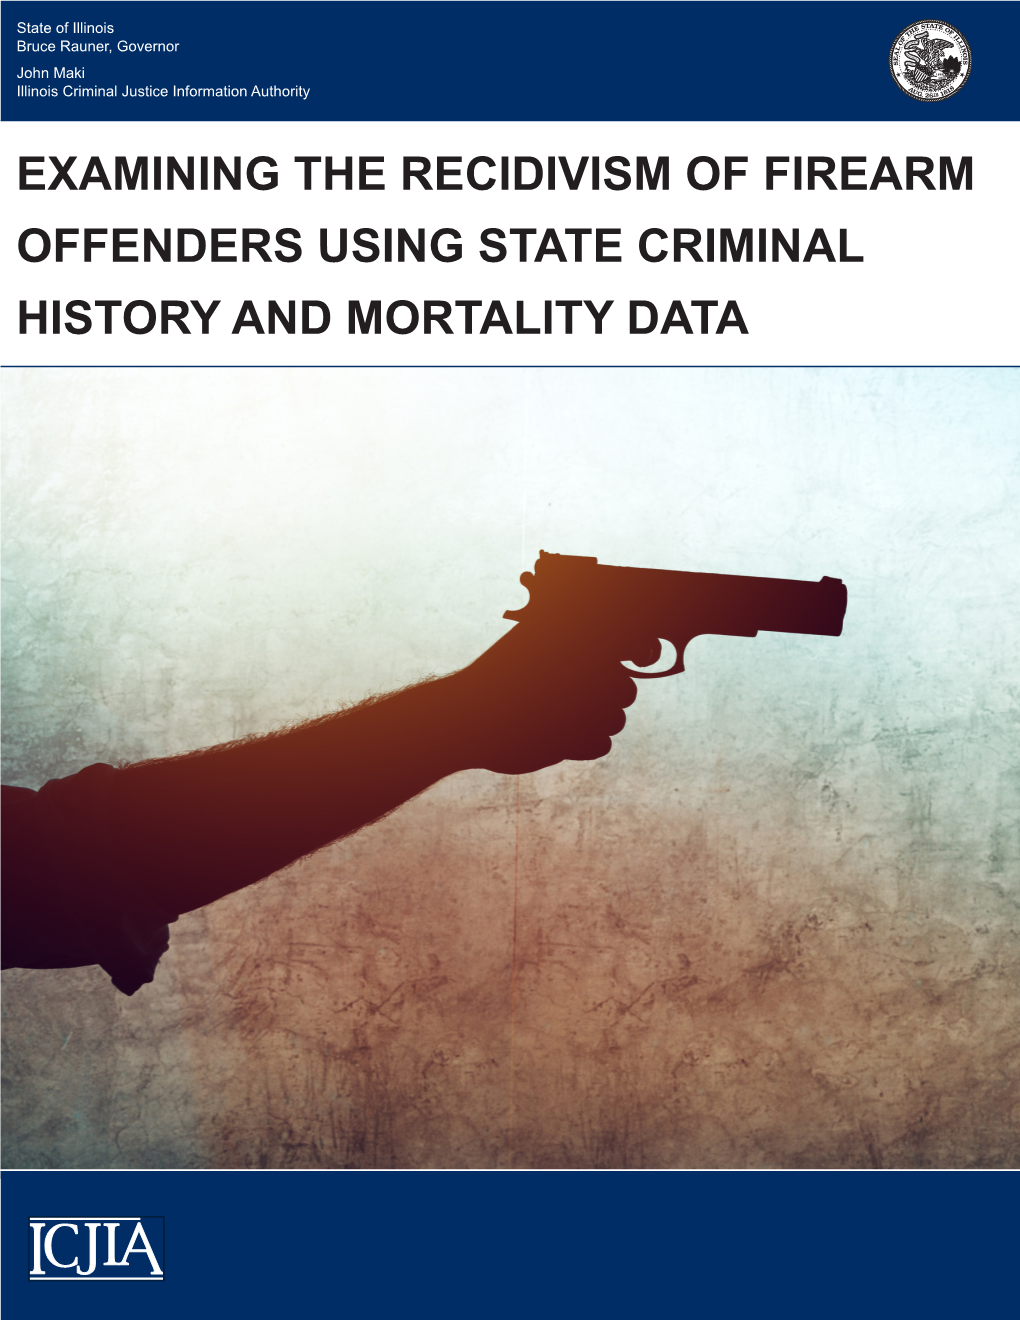 Examining the Recidivism of Firearm Offenders Using State Criminal History and Mortality Data